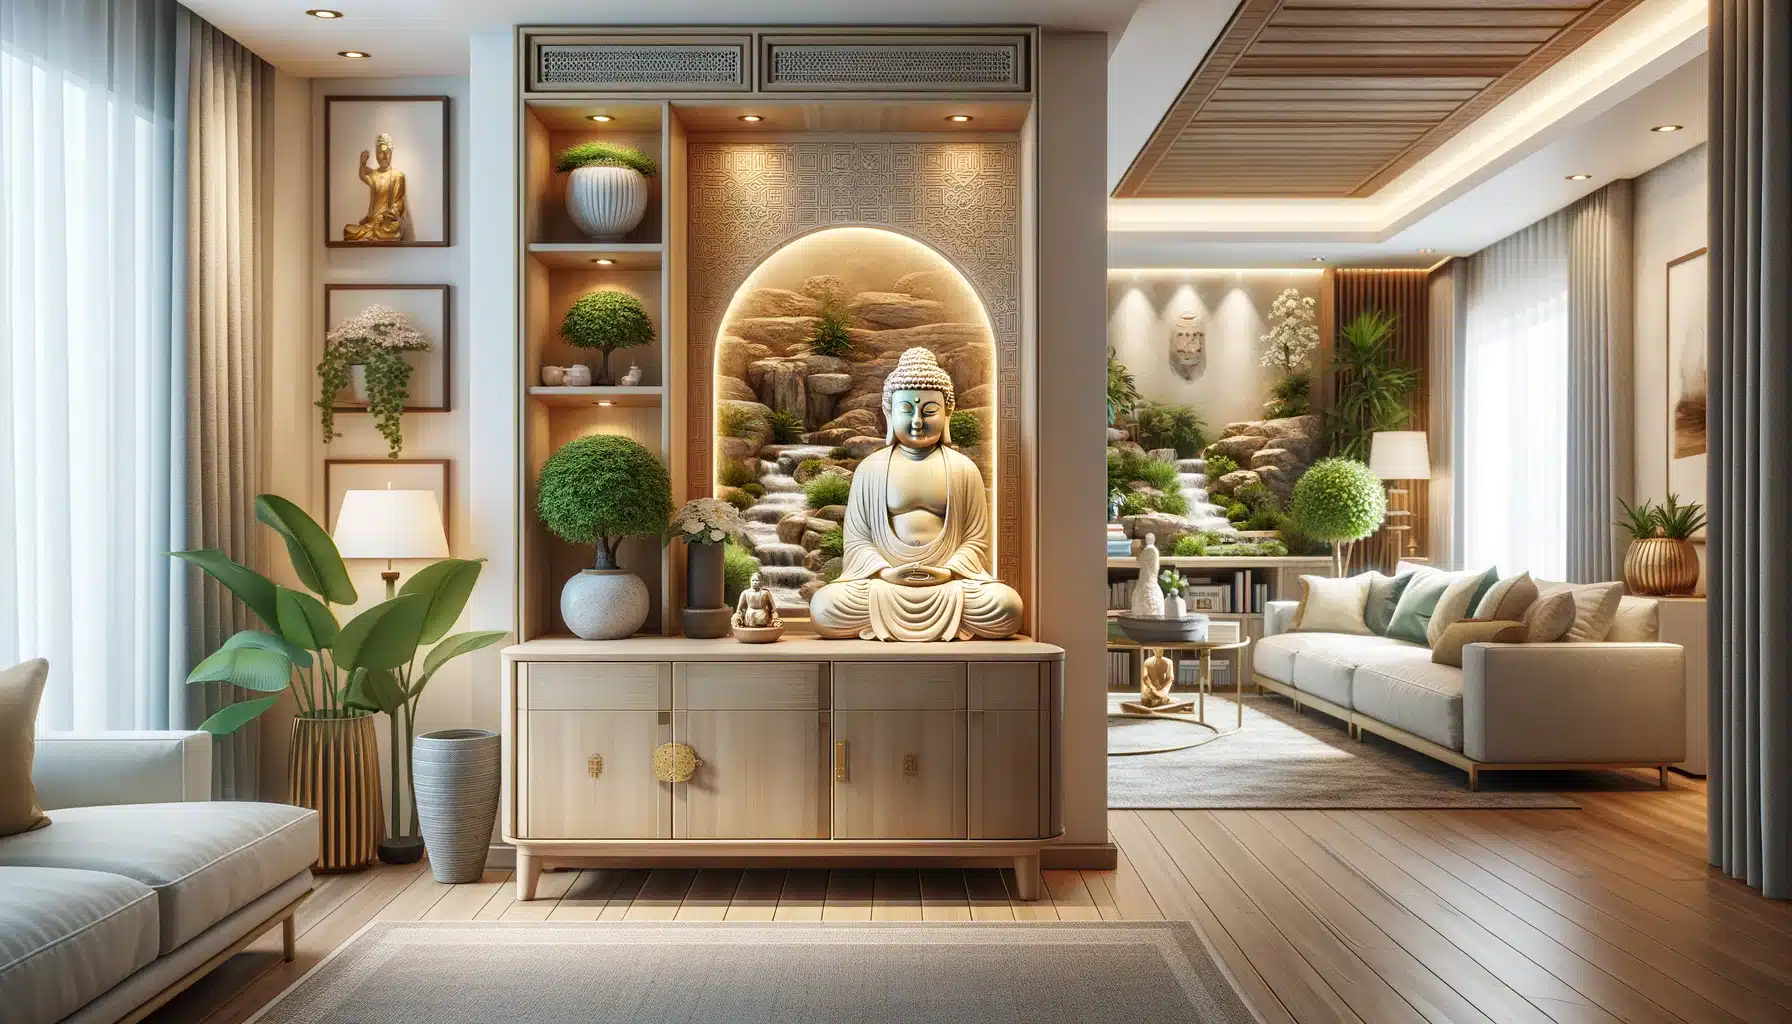 A cozy and inviting living space embodying Feng Shui principles, with an ideal placement of a Happy Buddha statue. The Buddha is positioned on a sideboard or shelf in the wealth corner of the room, which is typically the far left corner from the entrance. The room has soft lighting and includes elements such as a flowing indoor water feature, healthy green plants, and a clear path of entry. The decor is tasteful and minimalist, promoting a sense of abundance and well-being.